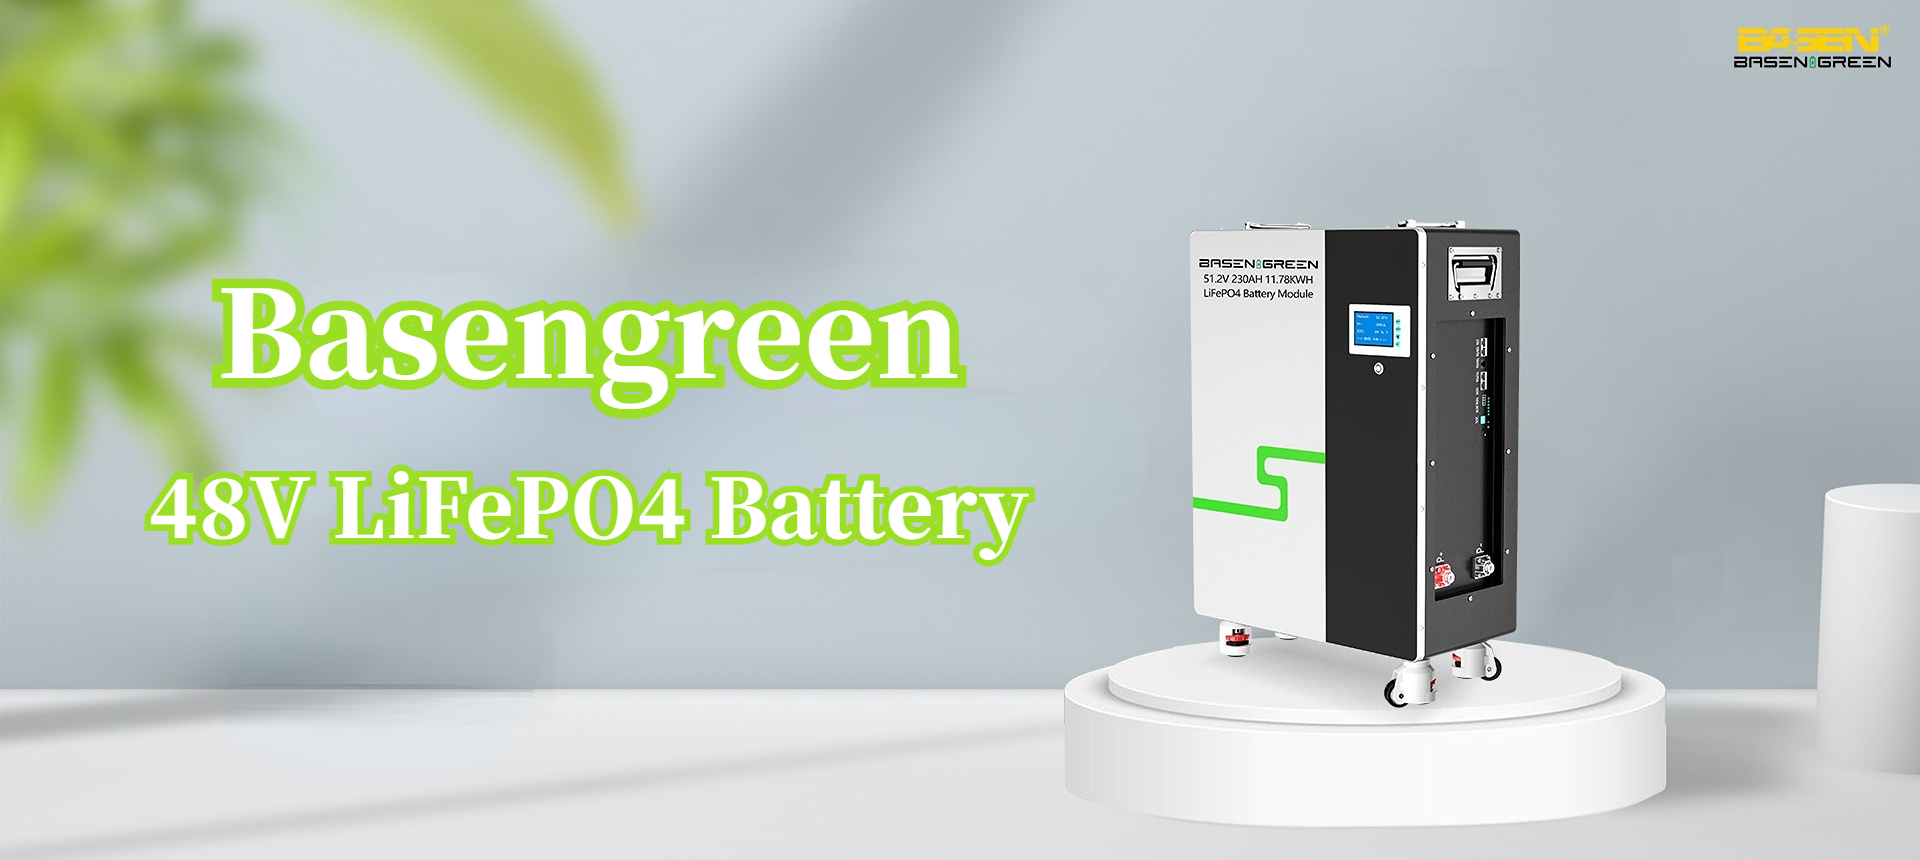 48V LiFePO4 Battery Features That Will Make Your Life Easier